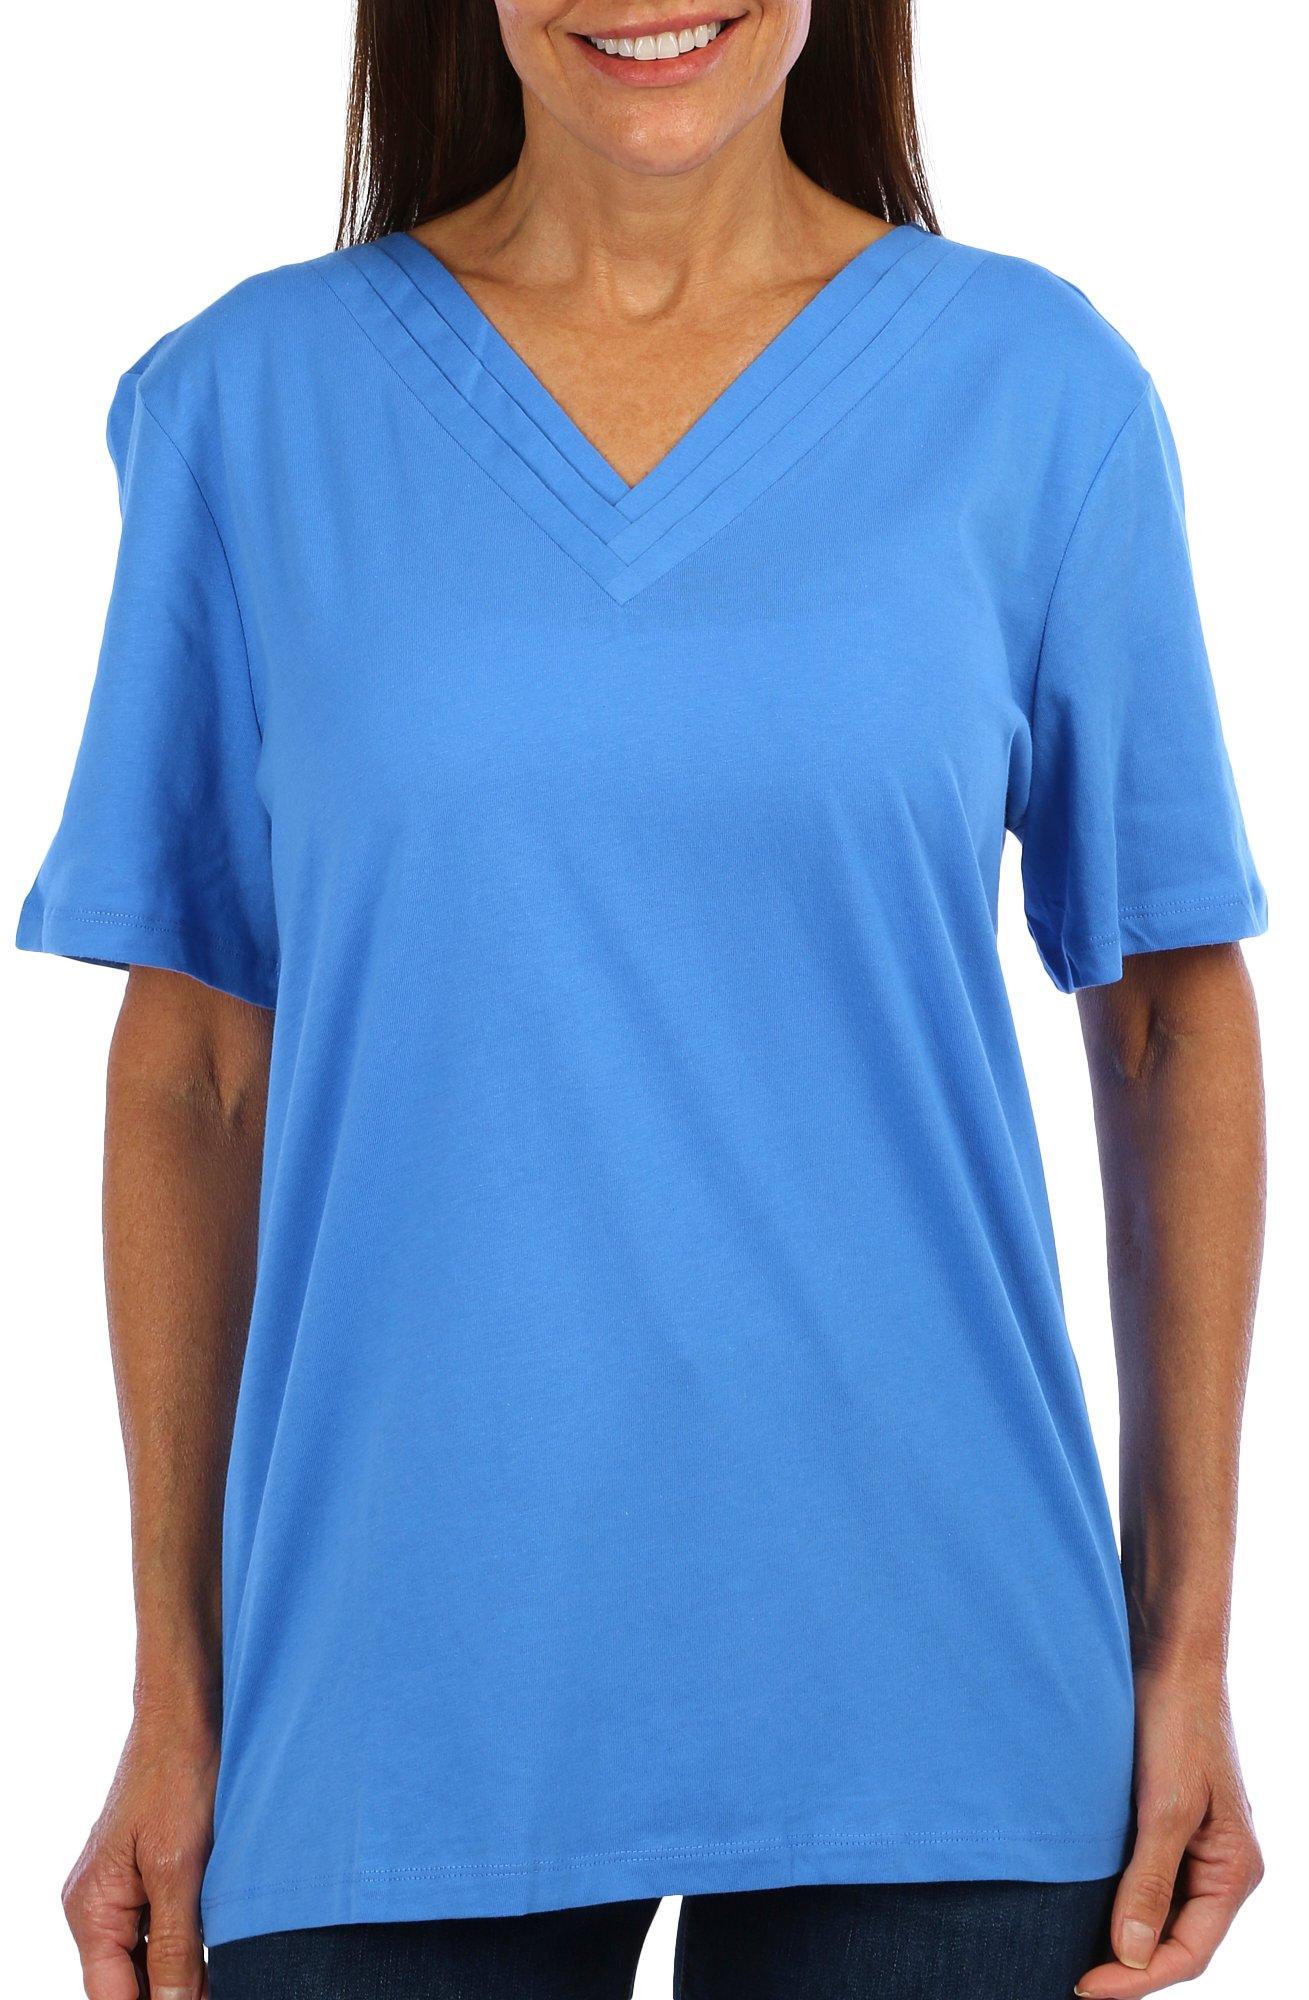 Coral Bay Womens Solid Layered V-Neckline Short Sleeve Top